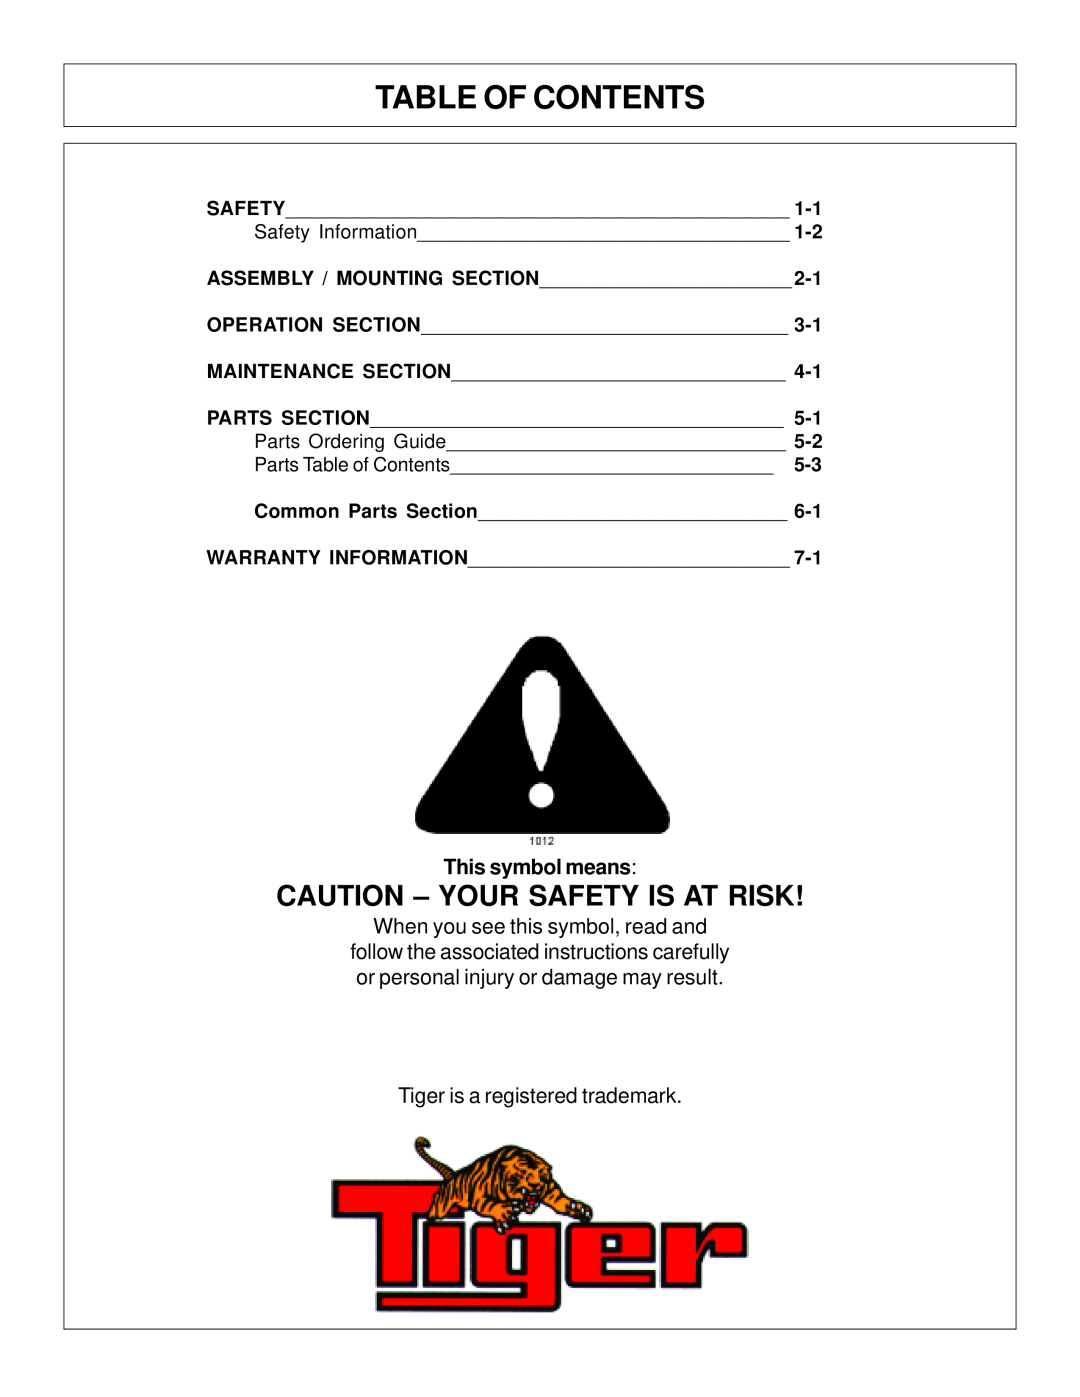 Tiger Products Co., Ltd JD 72-7520 manual Table Of Contents, Caution - Your Safety Is At Risk, This symbol means 